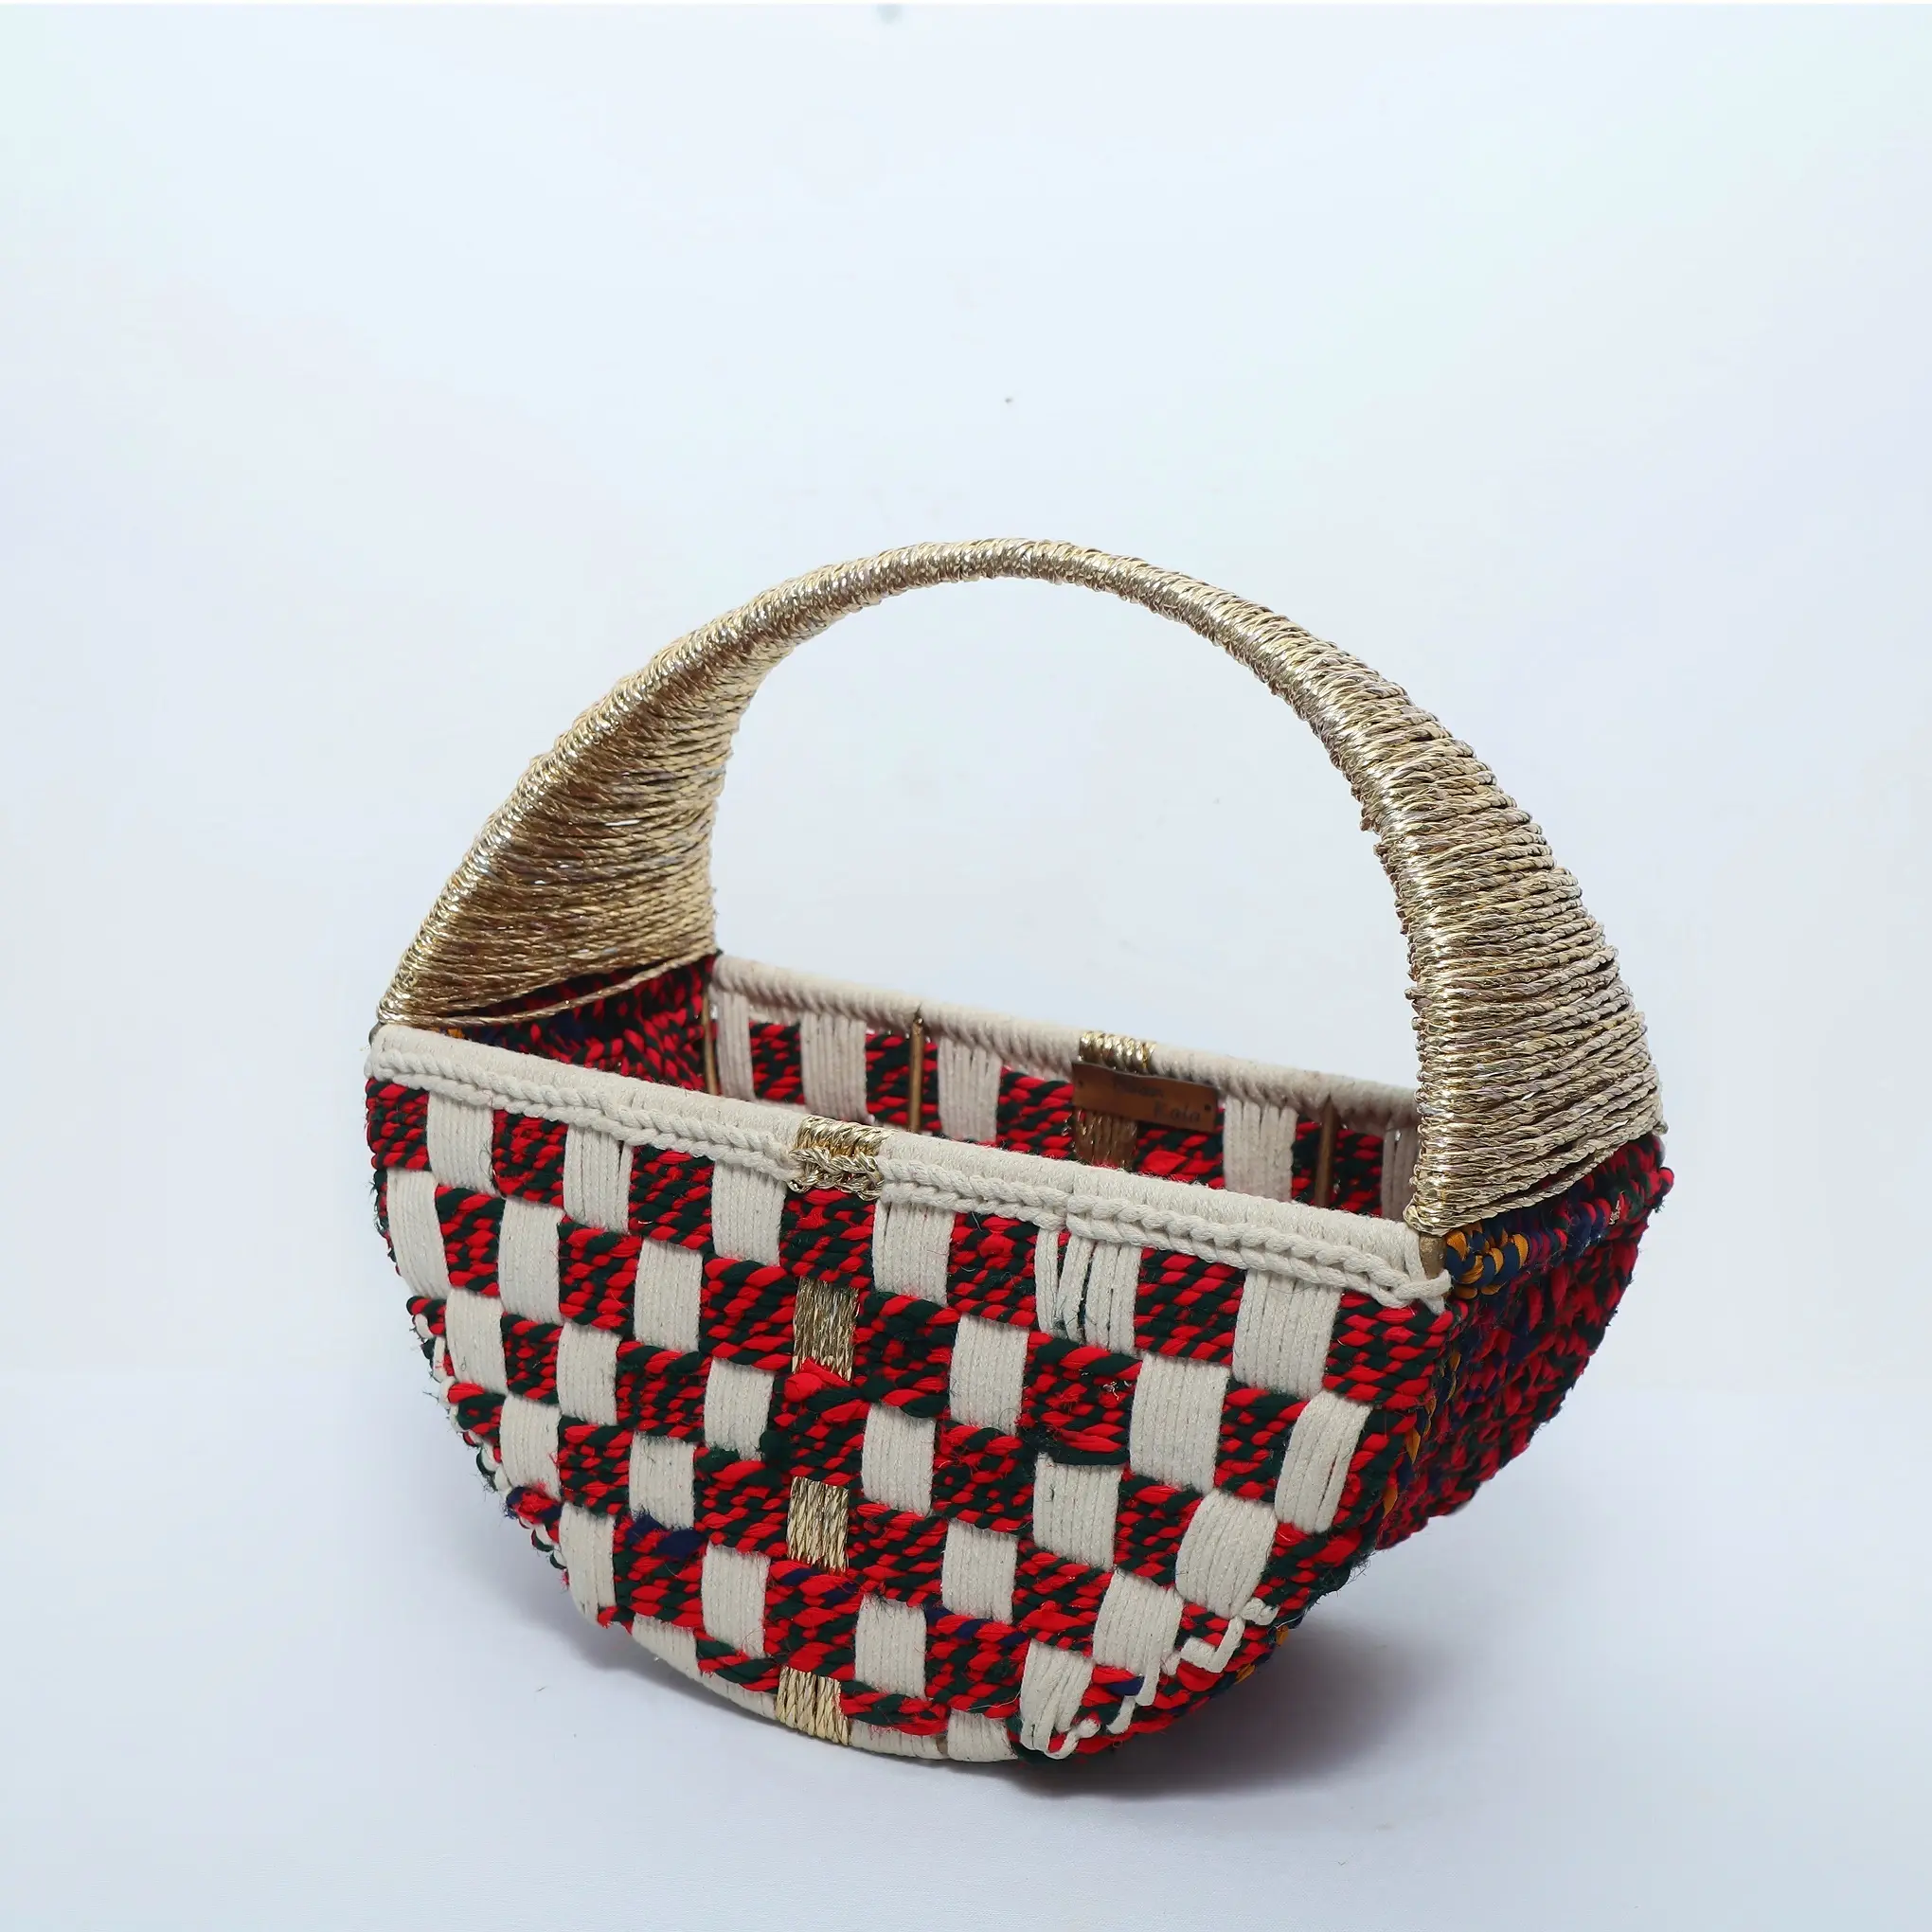 Best Selling Customized Woven Gifting Basket Made of Cotton and Textile Waste at Best Prices from India